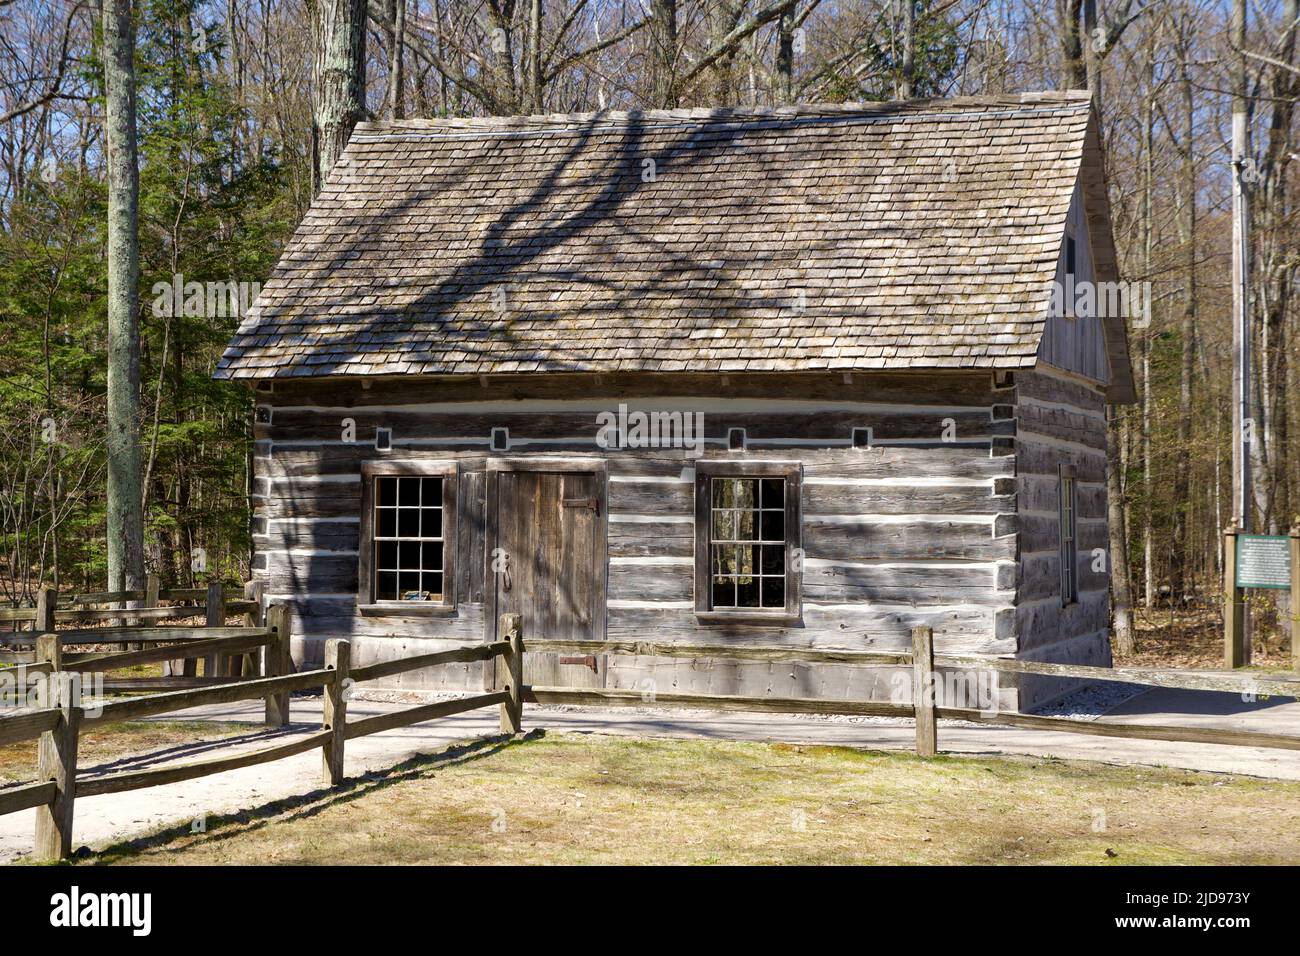 TRAVERSE CITY, MICHIGAN, UNITED STATES - 16 May 2018: Exterior view of an old restored shack near Mission Point Lighthouse in northern Michigan Stock Photo